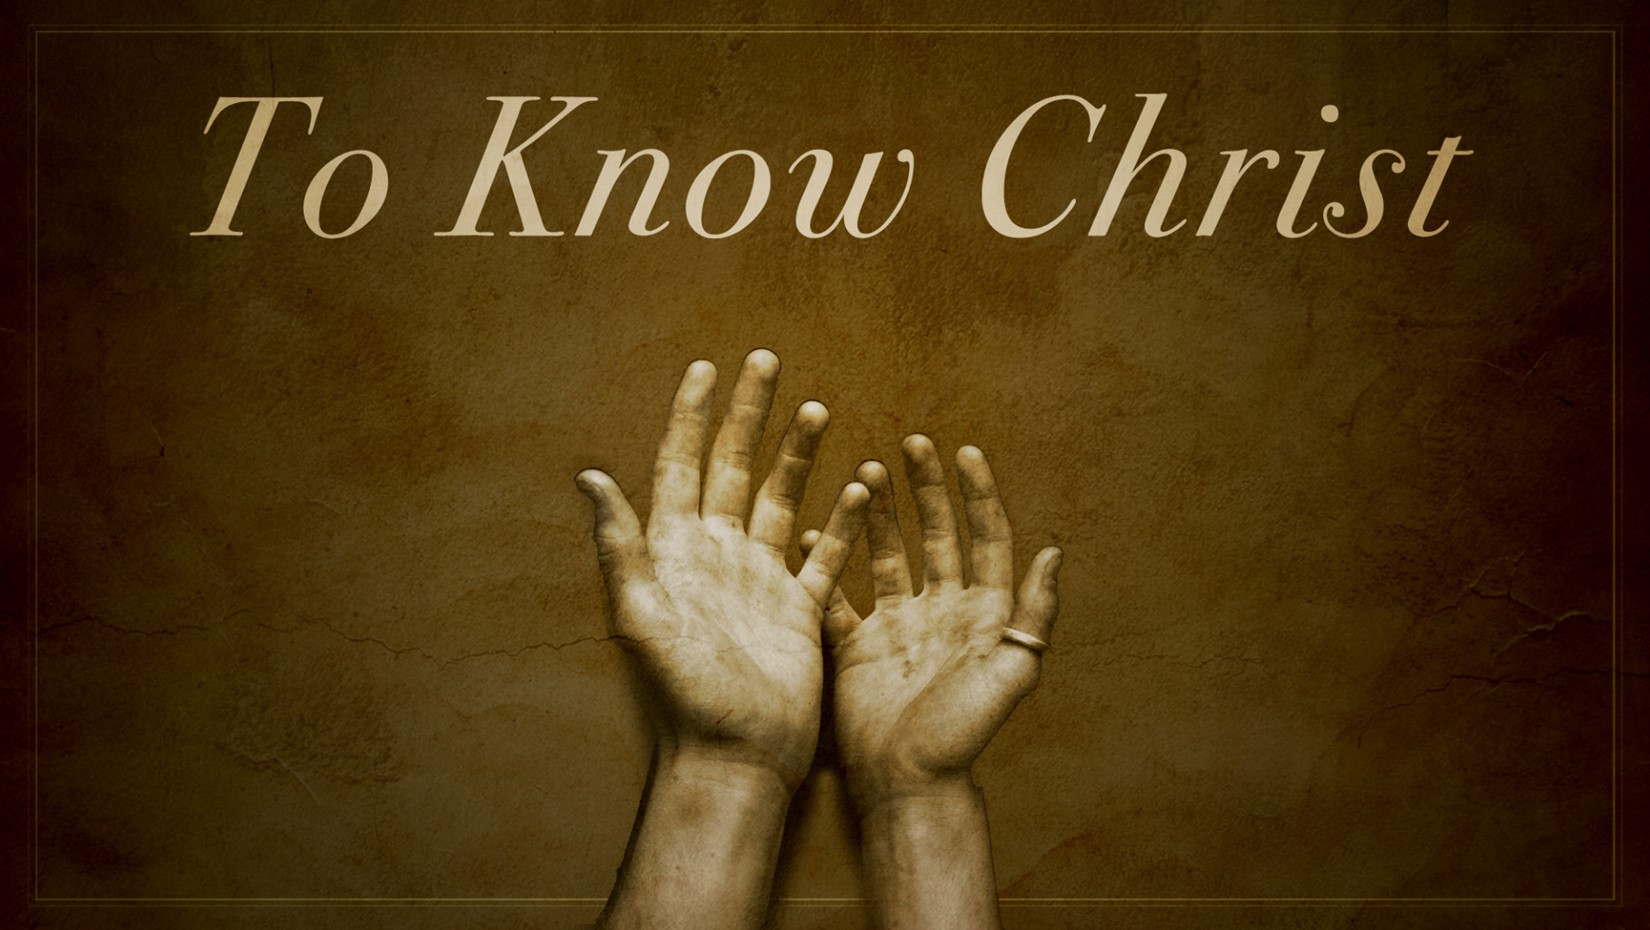 05.02.2021 To Know Christ